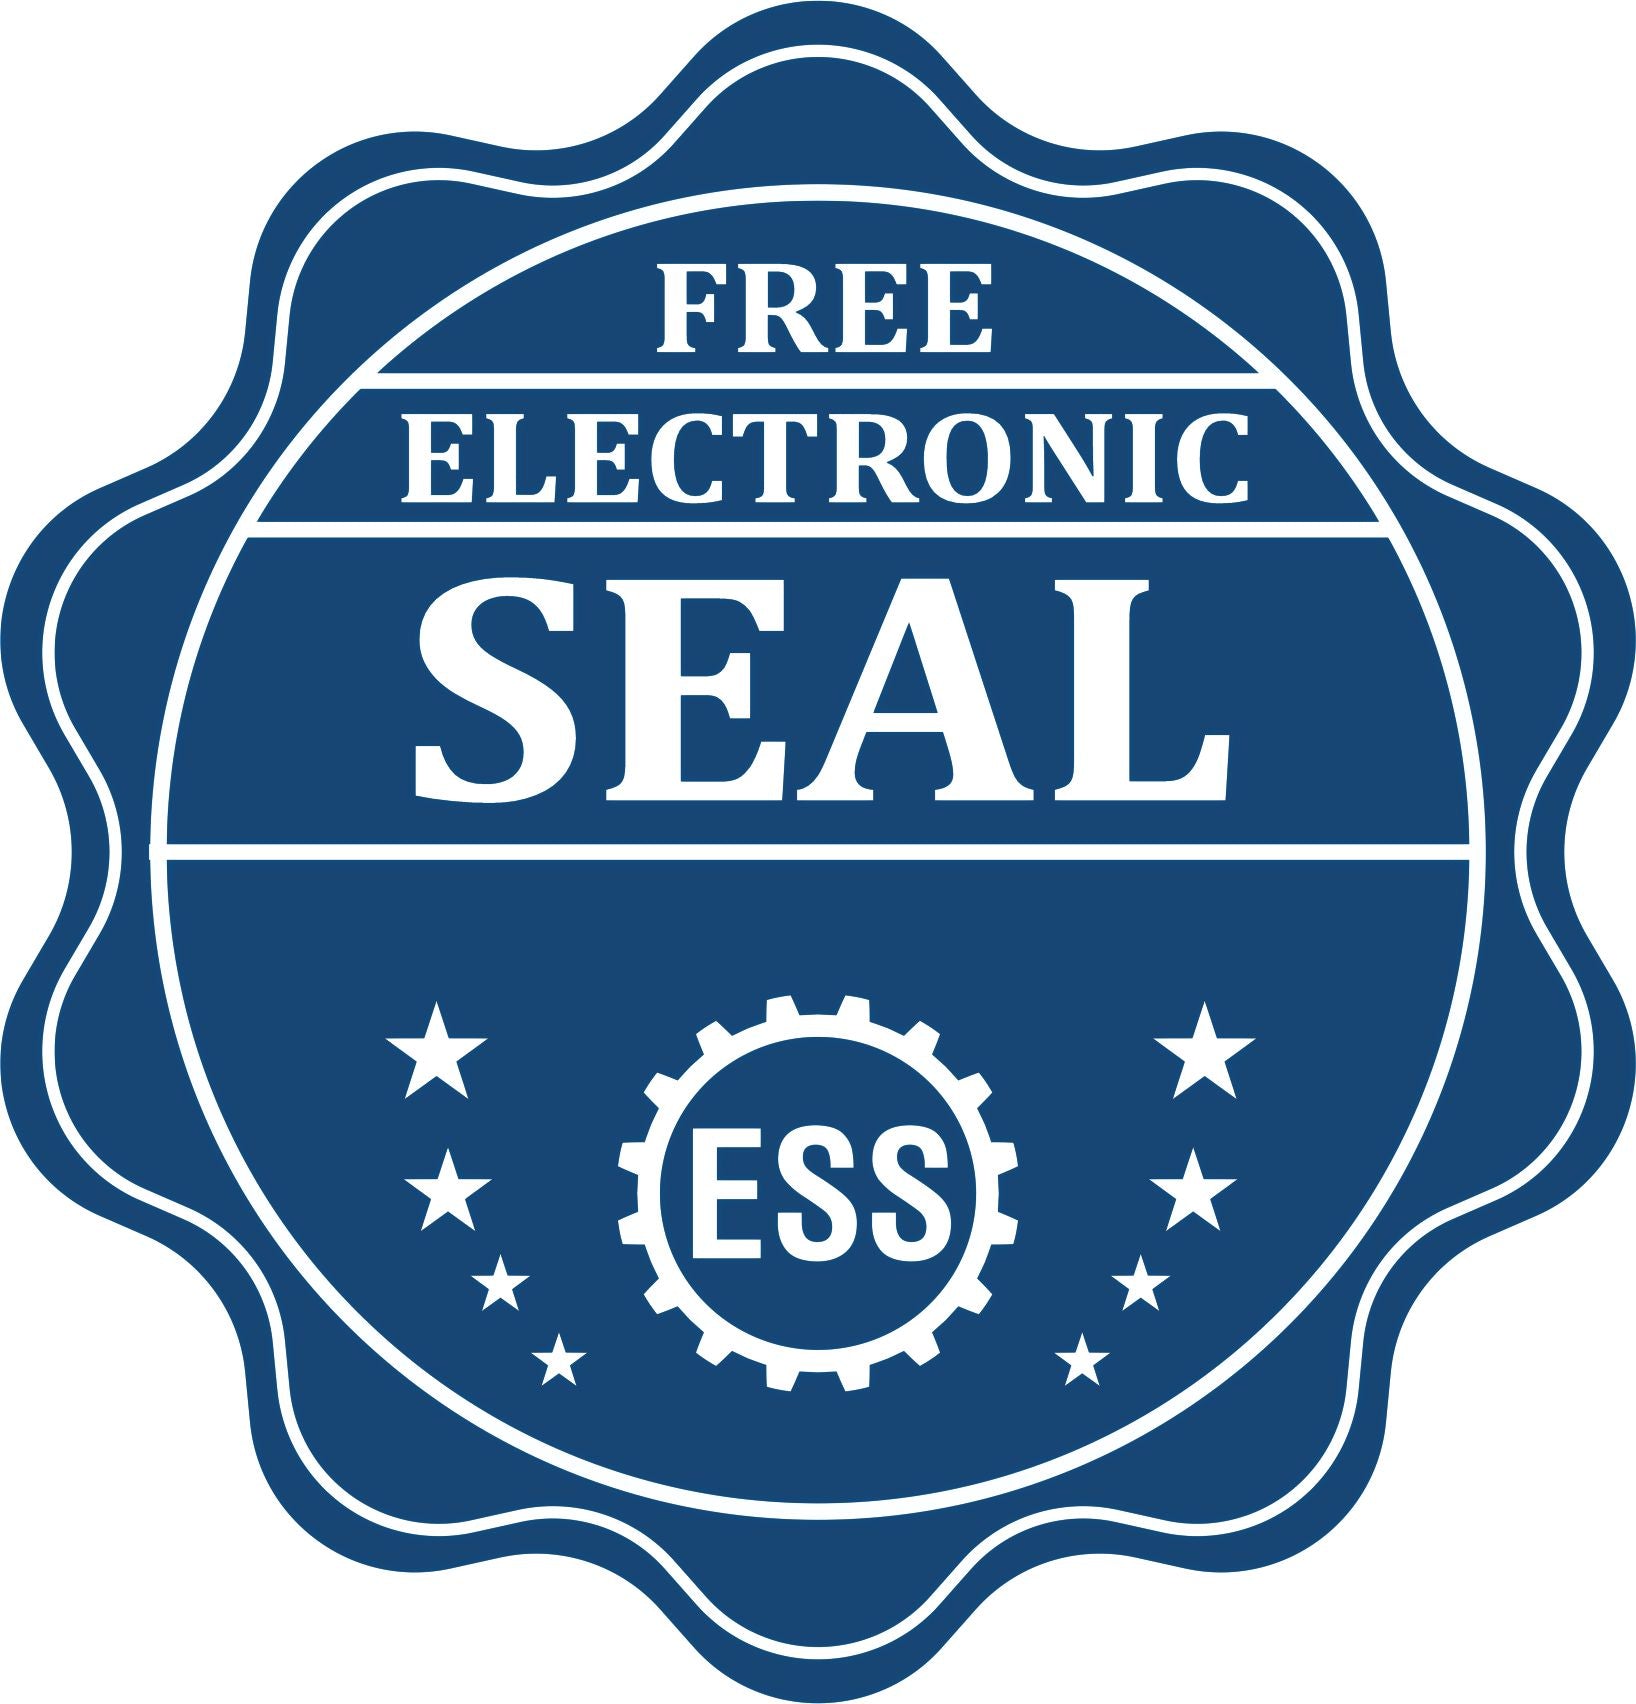 A badge showing a free electronic seal for the Soft Pocket Indiana Landscape Architect Embosser with stars and the ESS gear on the emblem.